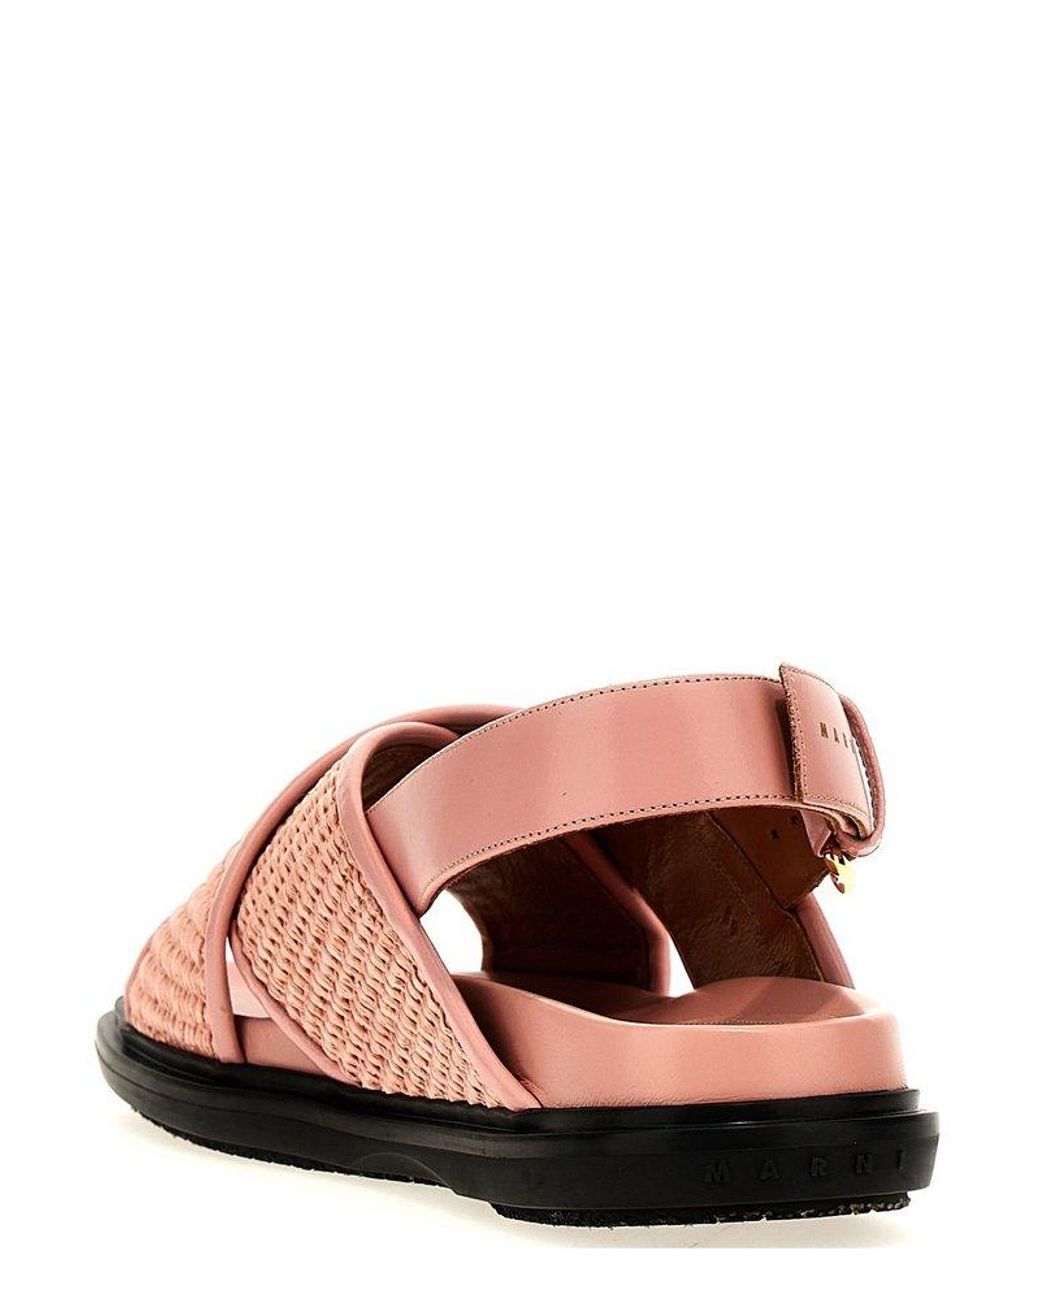 Marni Fussbet Sandals in Pink | Lyst